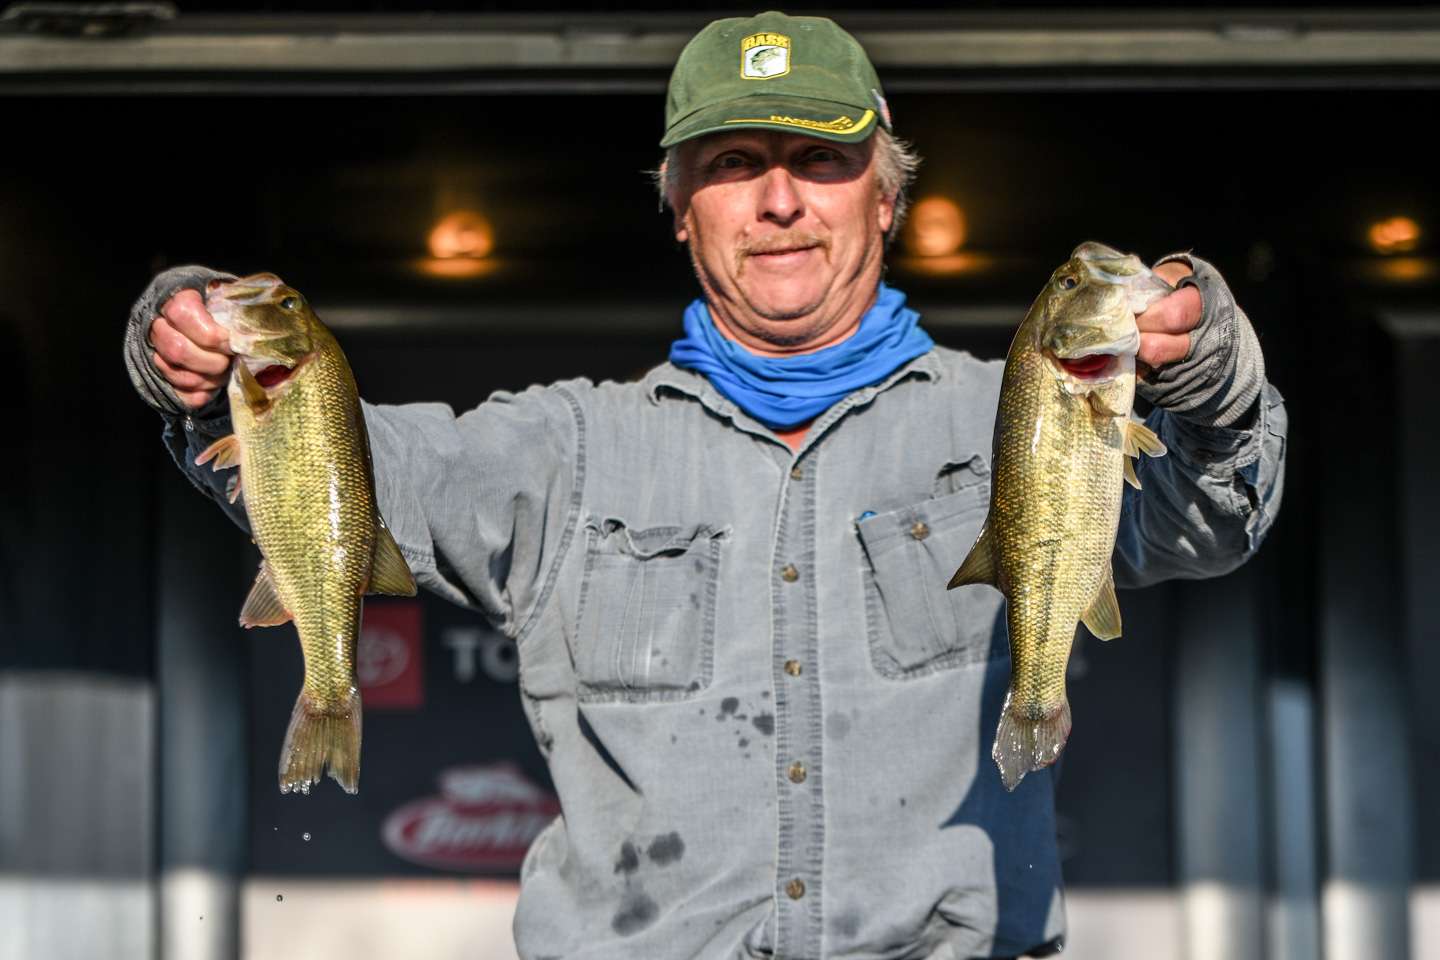 Kelly Tonwson, 1st place co-angler (11-13)